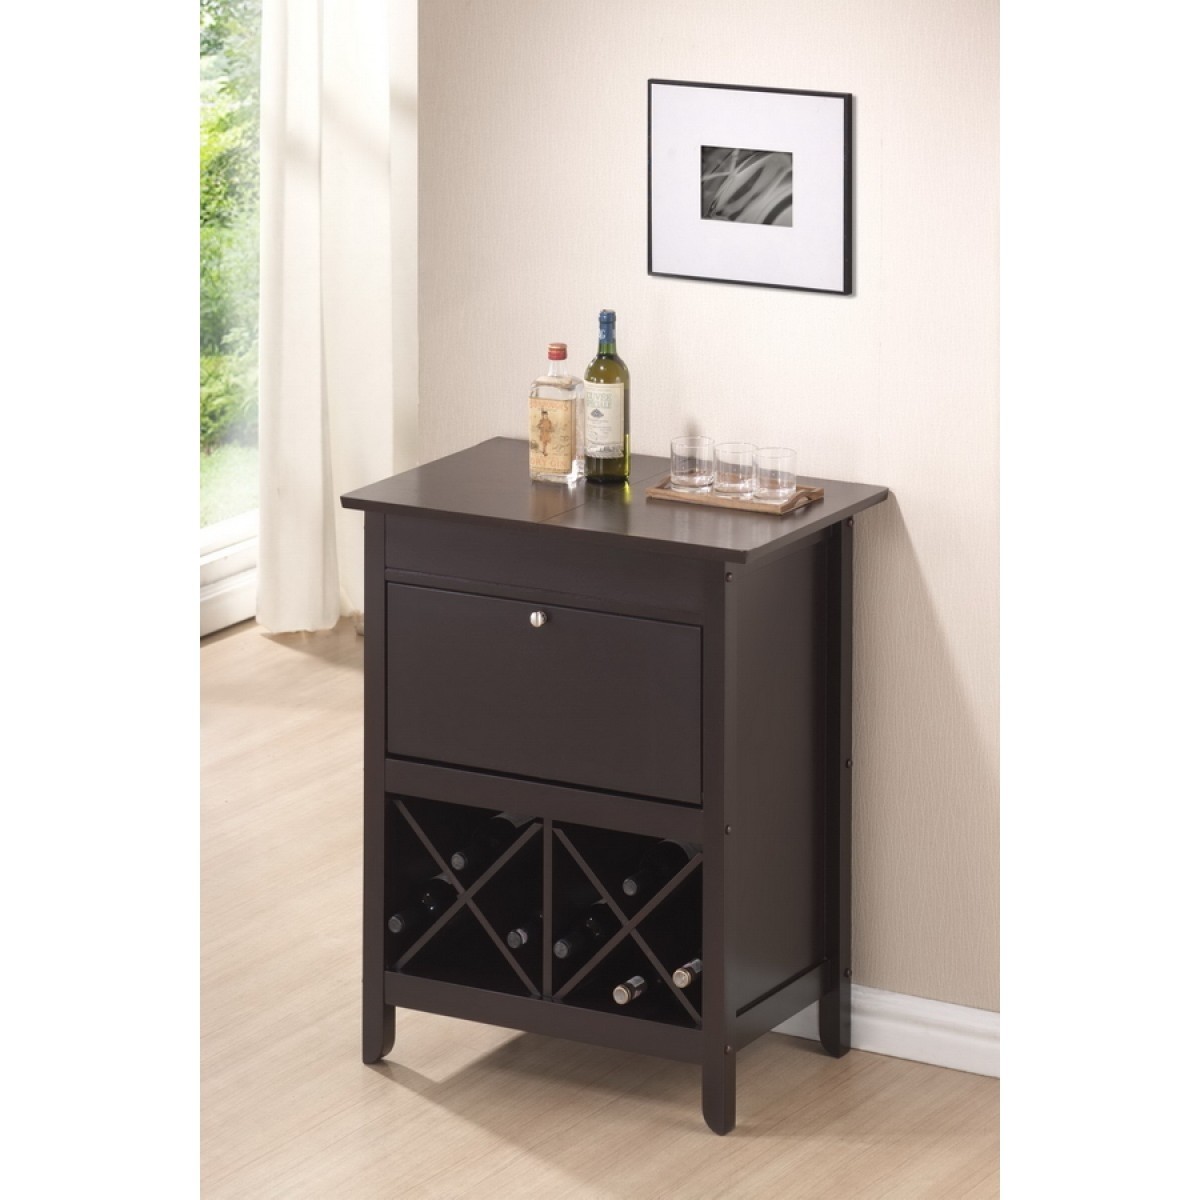 Tuscany brown modern dry bar and wine cabinet see white